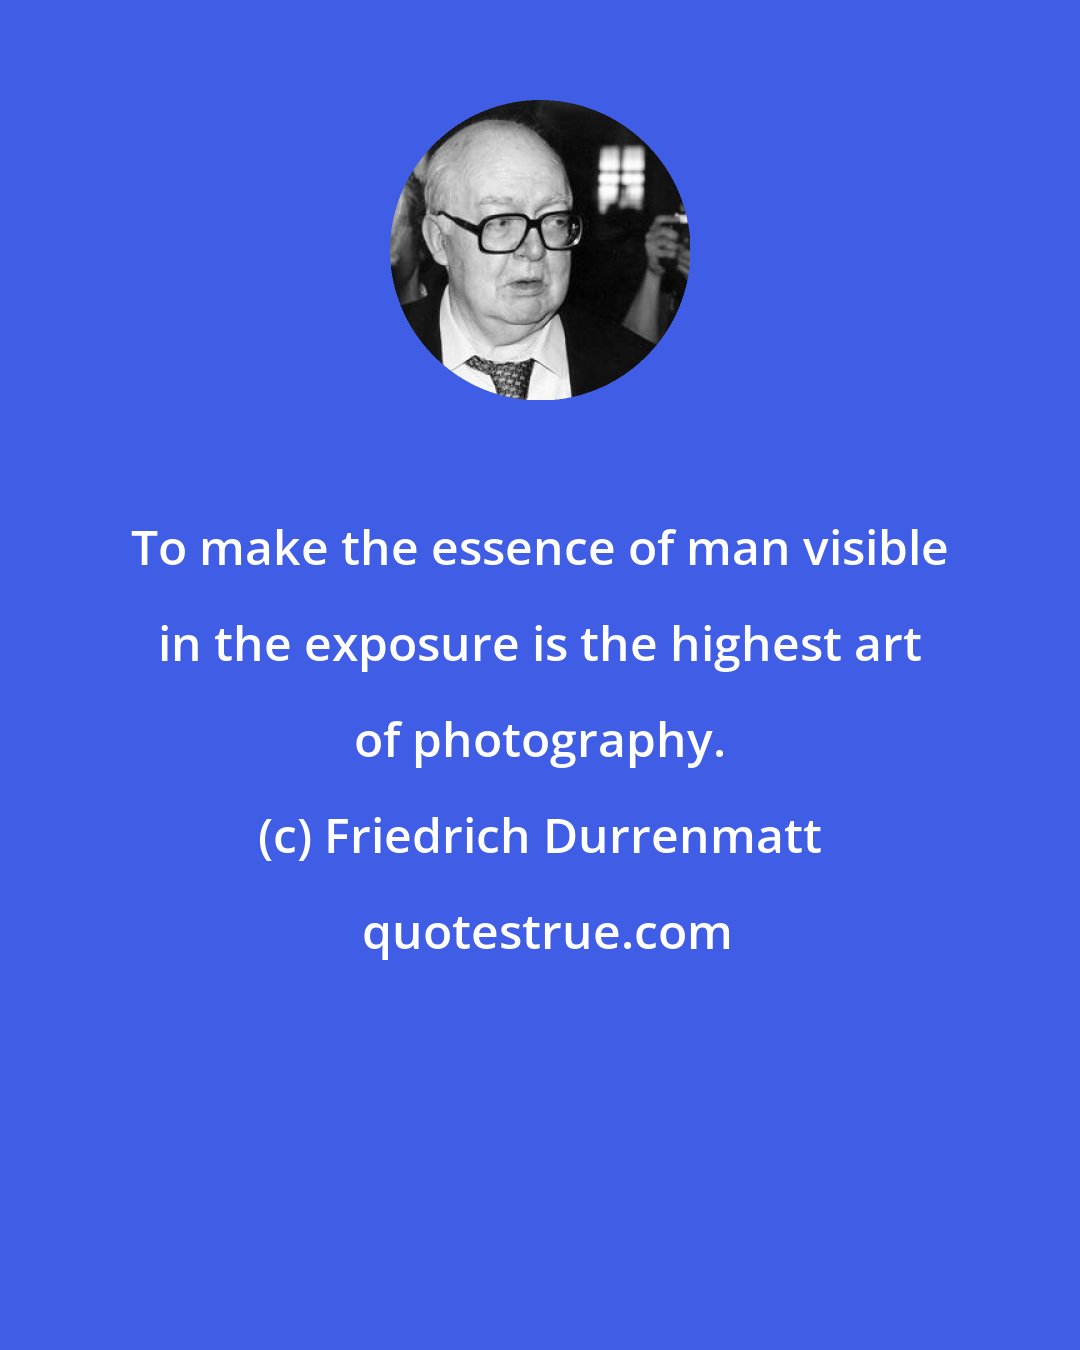 Friedrich Durrenmatt: To make the essence of man visible in the exposure is the highest art of photography.